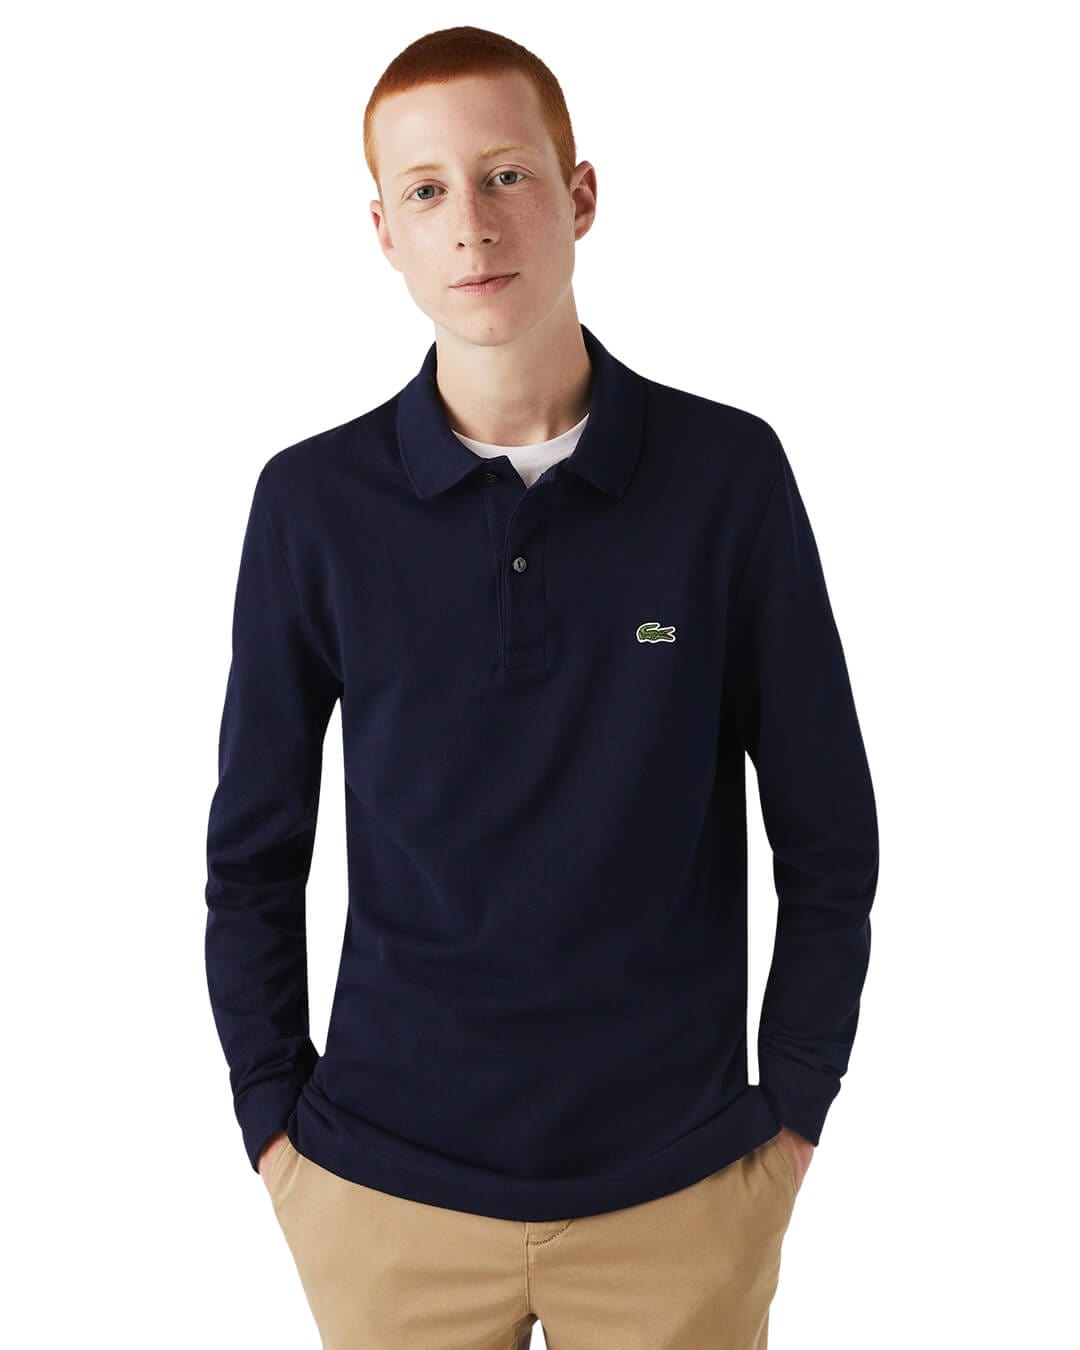 Lacoste Polo Shirts Lacoste Navy Petit Pique Long Sleeved Polo Shirt